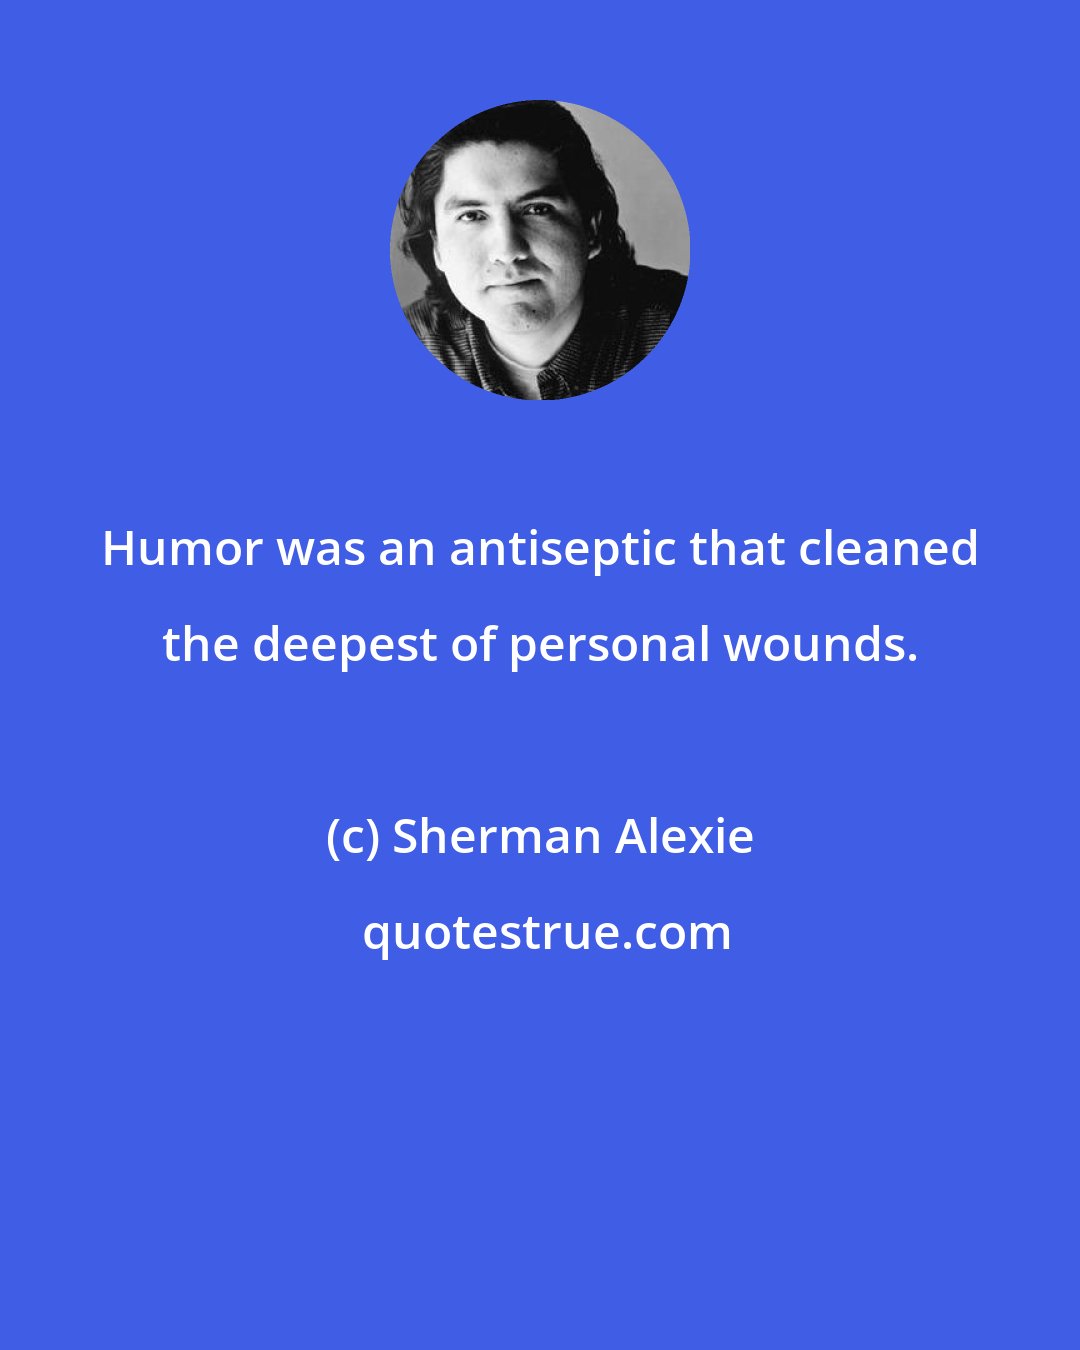 Sherman Alexie: Humor was an antiseptic that cleaned the deepest of personal wounds.